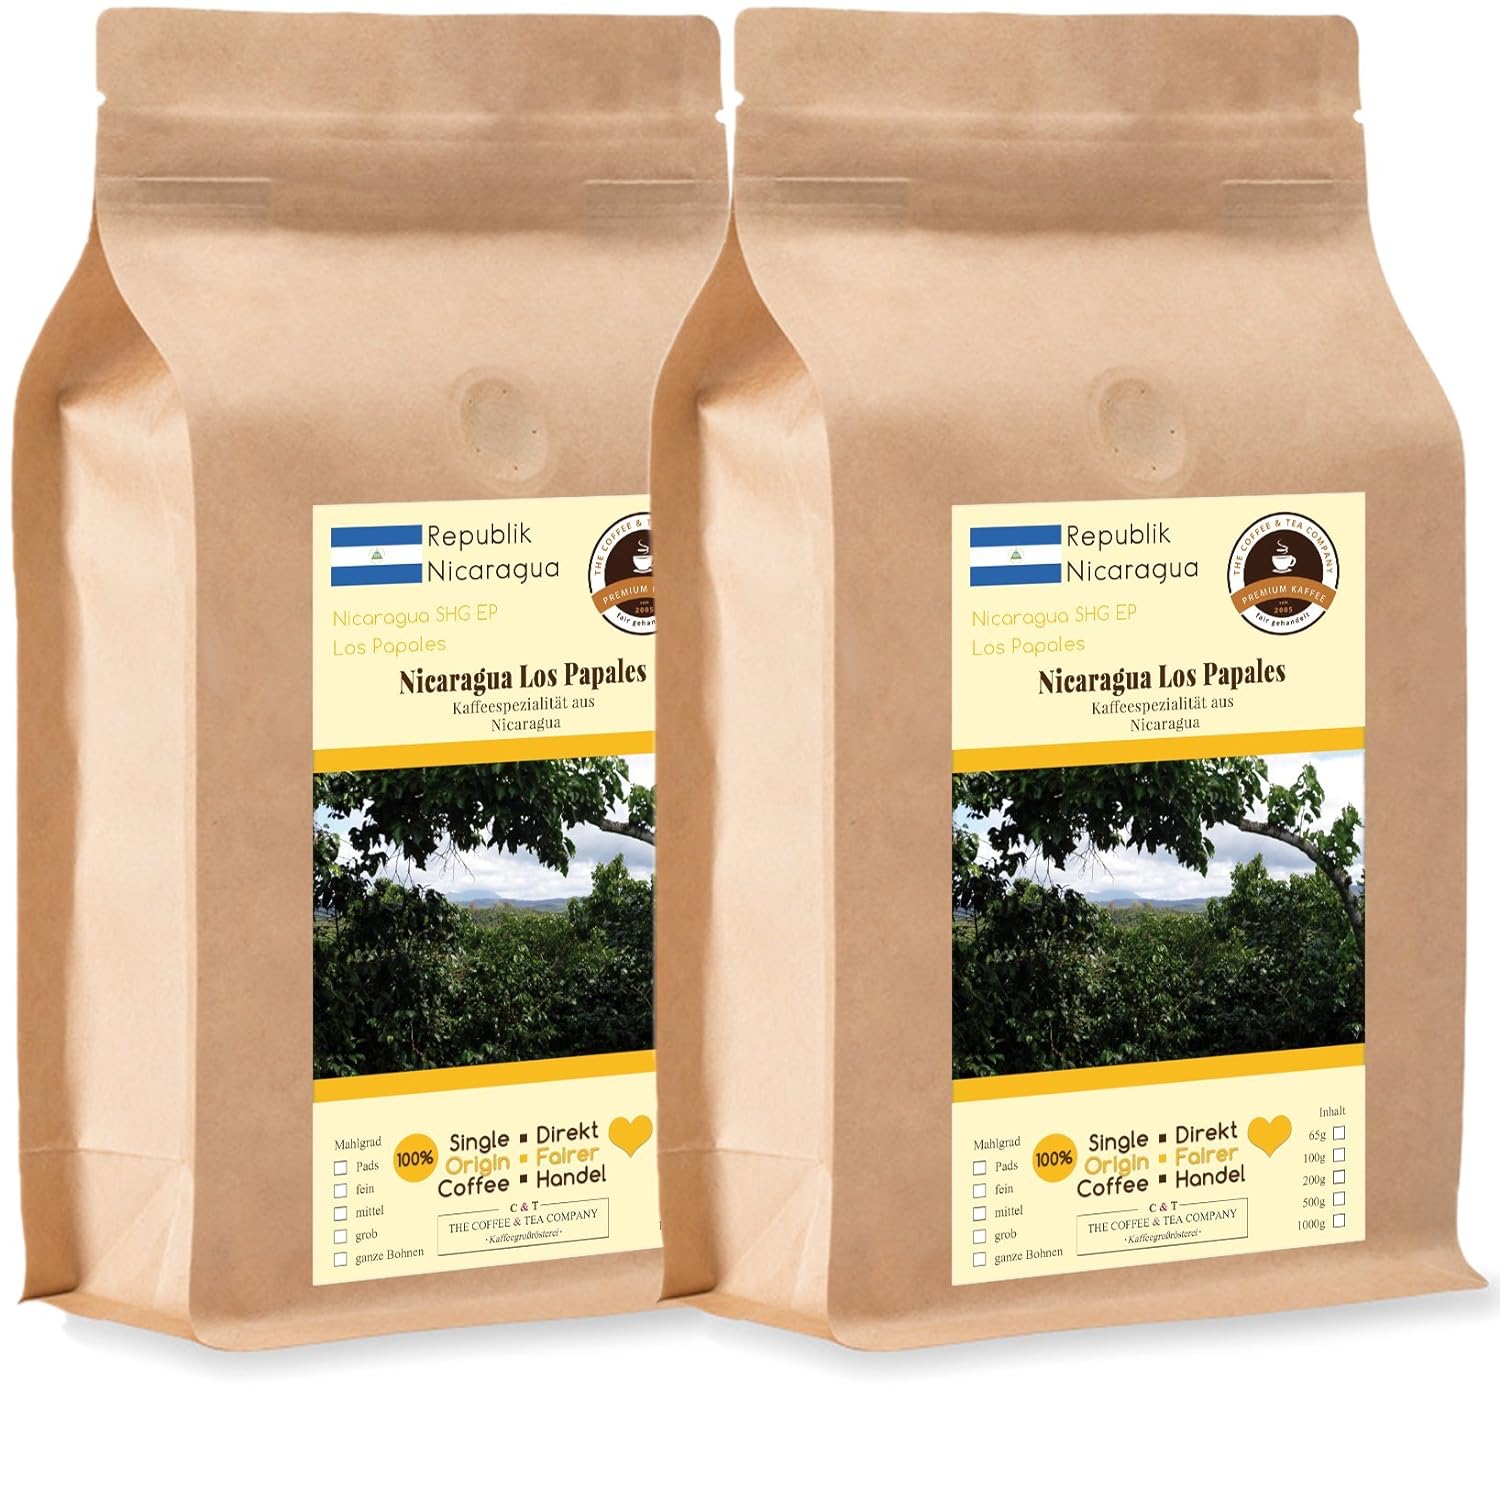 Coffee Globetrotter - Coffee with Heart - Nicaragua Los Papales - 2 x 1000 g Finely Ground - for Fully Automatic Coffee Grinder - Roasted Coffee Fair Trade | Refill Pack Economy Pack